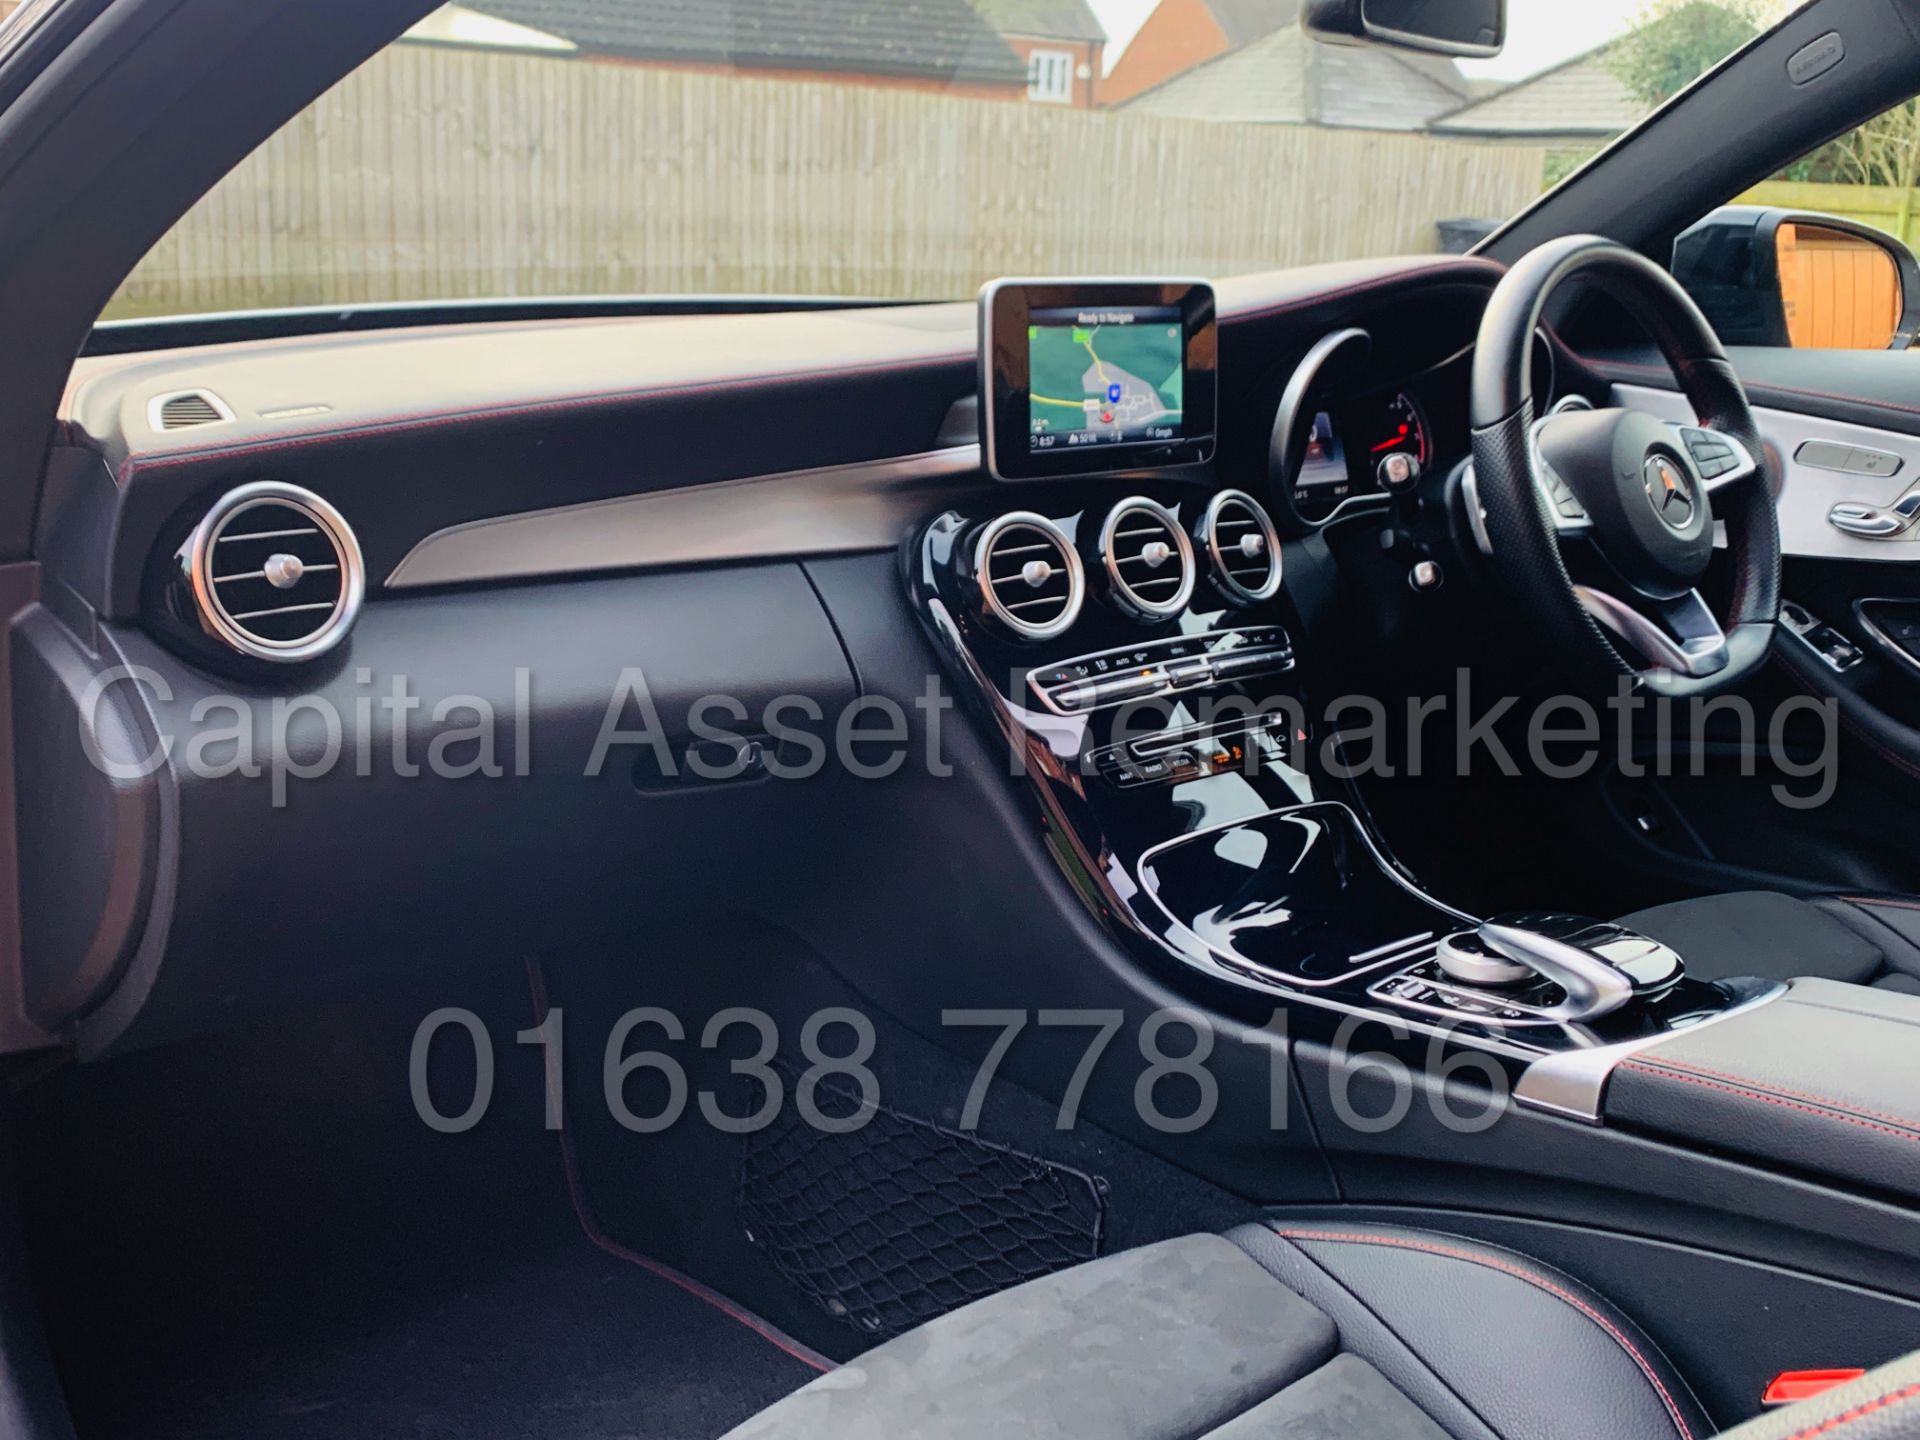 MERCEDES-BENZ C43 AMG *PREMIUM 4 MATIC* COUPE (2017) '9-G AUTO - LEATHER - SAT NAV' **FULLY LOADED** - Image 21 of 46